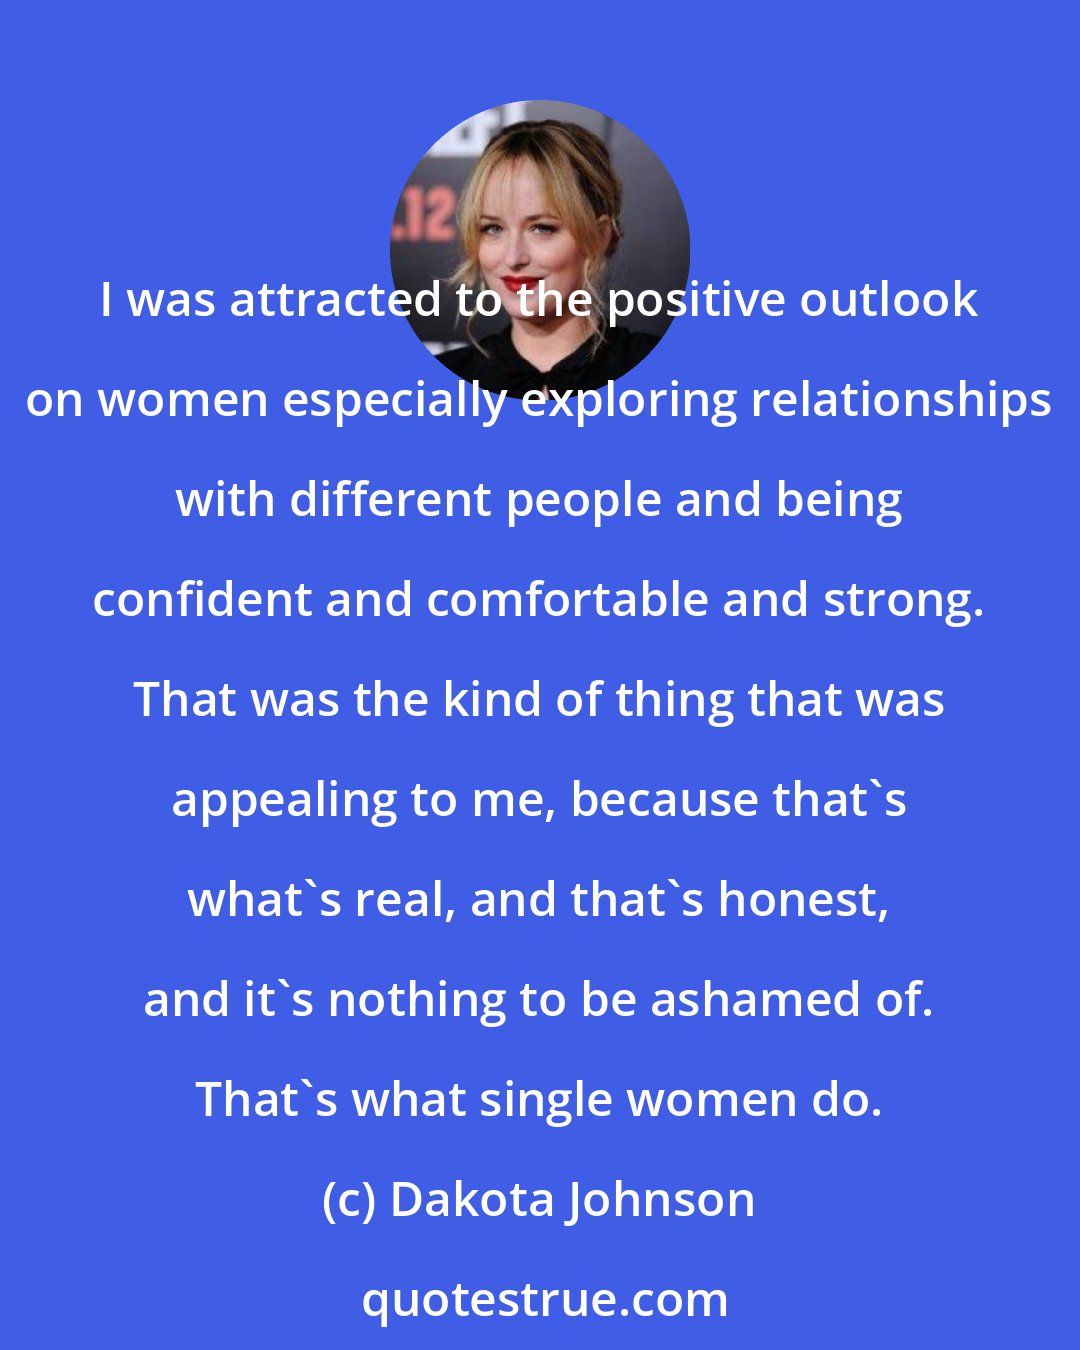 Dakota Johnson: I was attracted to the positive outlook on women especially exploring relationships with different people and being confident and comfortable and strong. That was the kind of thing that was appealing to me, because that's what's real, and that's honest, and it's nothing to be ashamed of. That's what single women do.